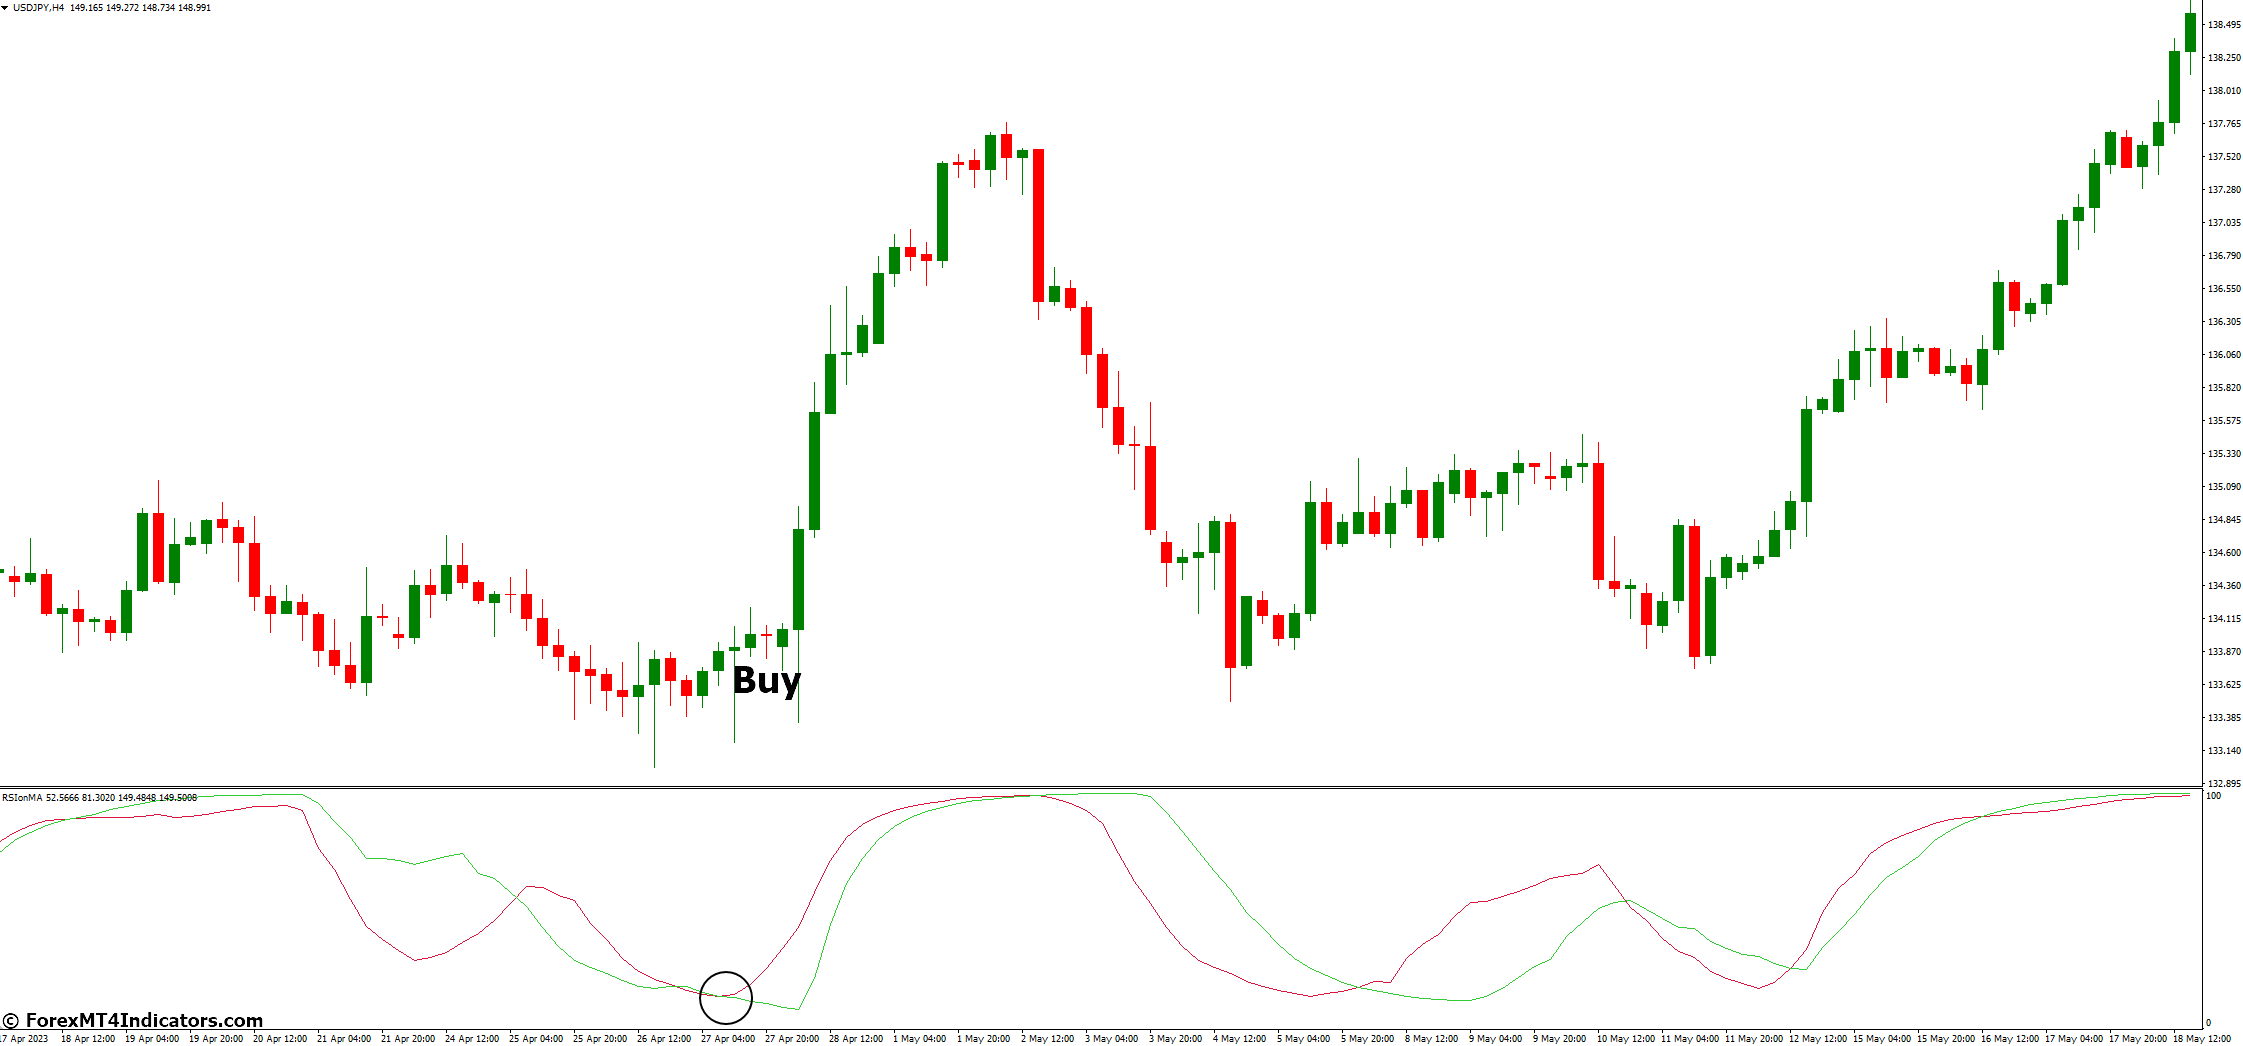 How to Trade with RSI on MA MT4 Indicator - Buy Entry